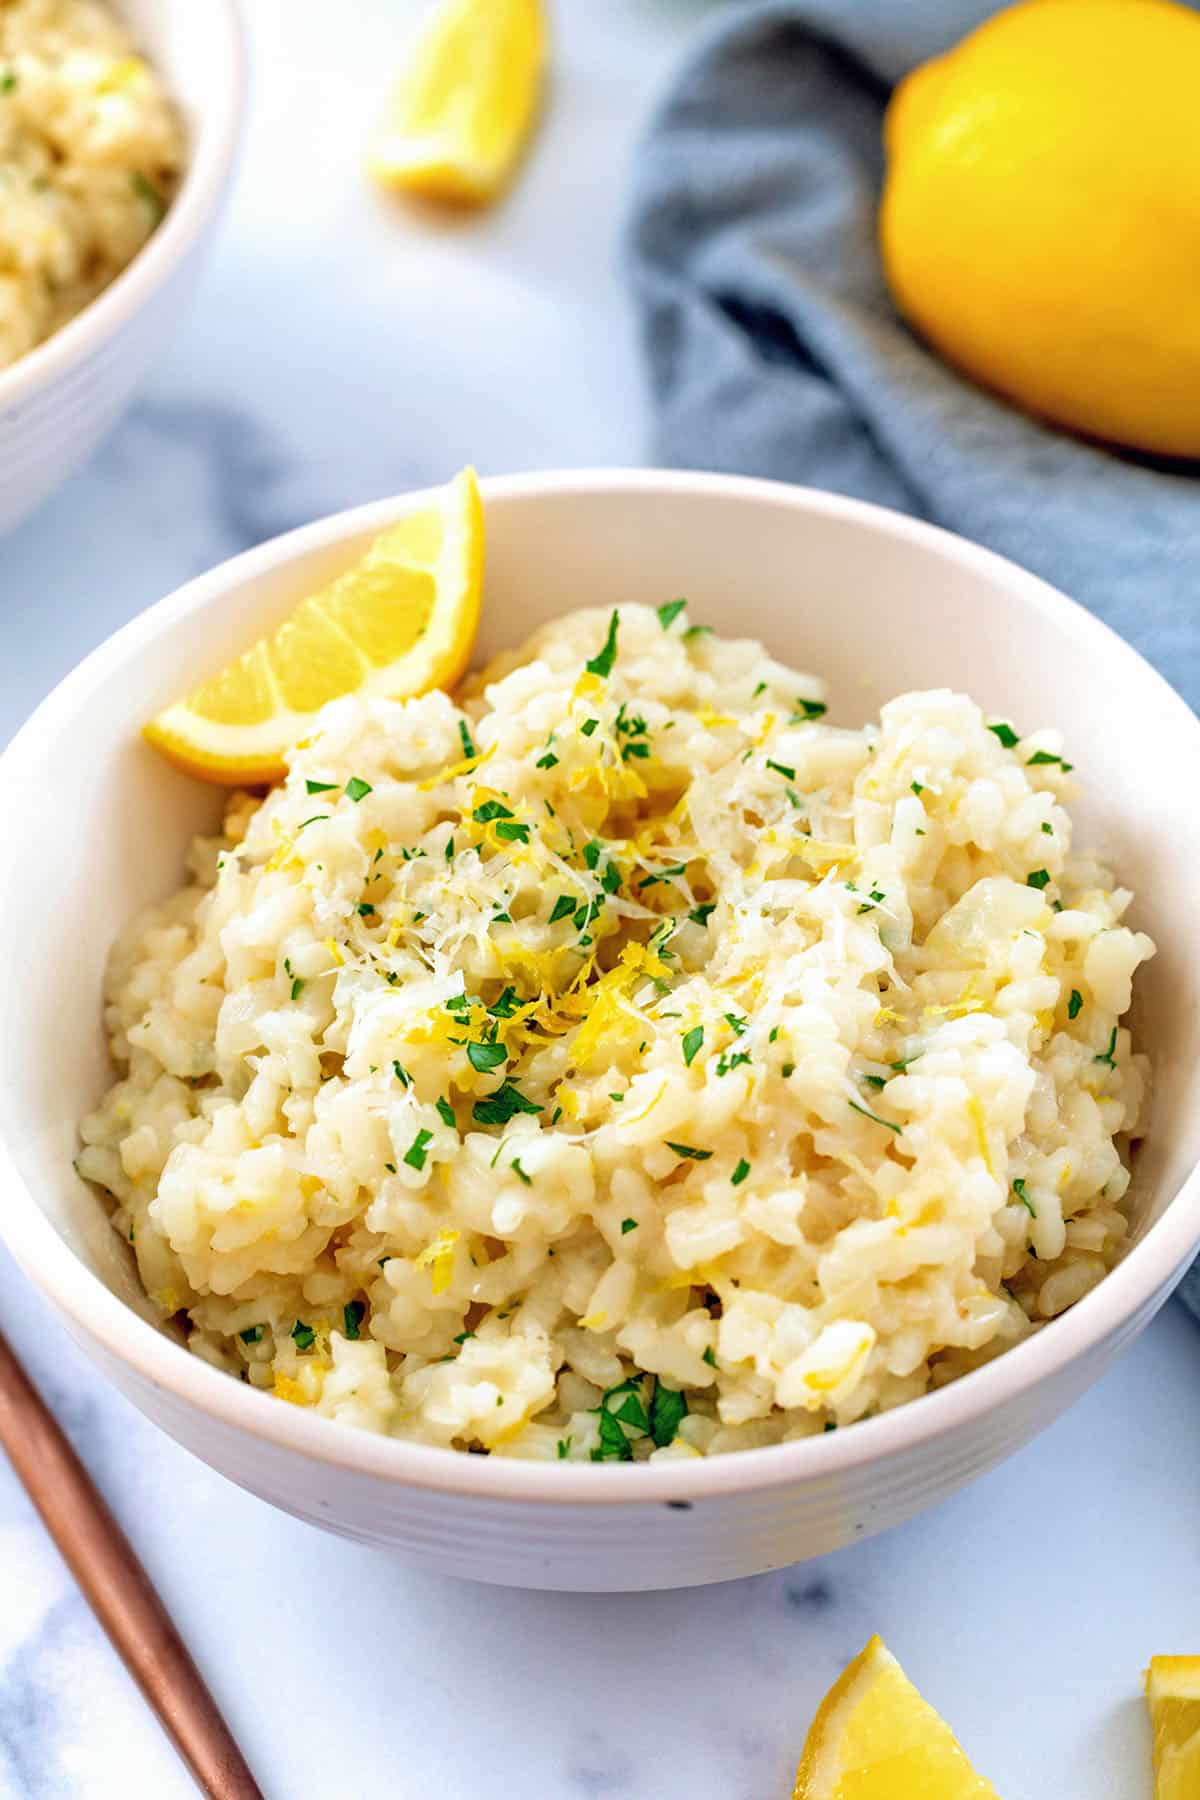 Overhead view of a bowl of lemon risotto with parsley and lemon wedges.